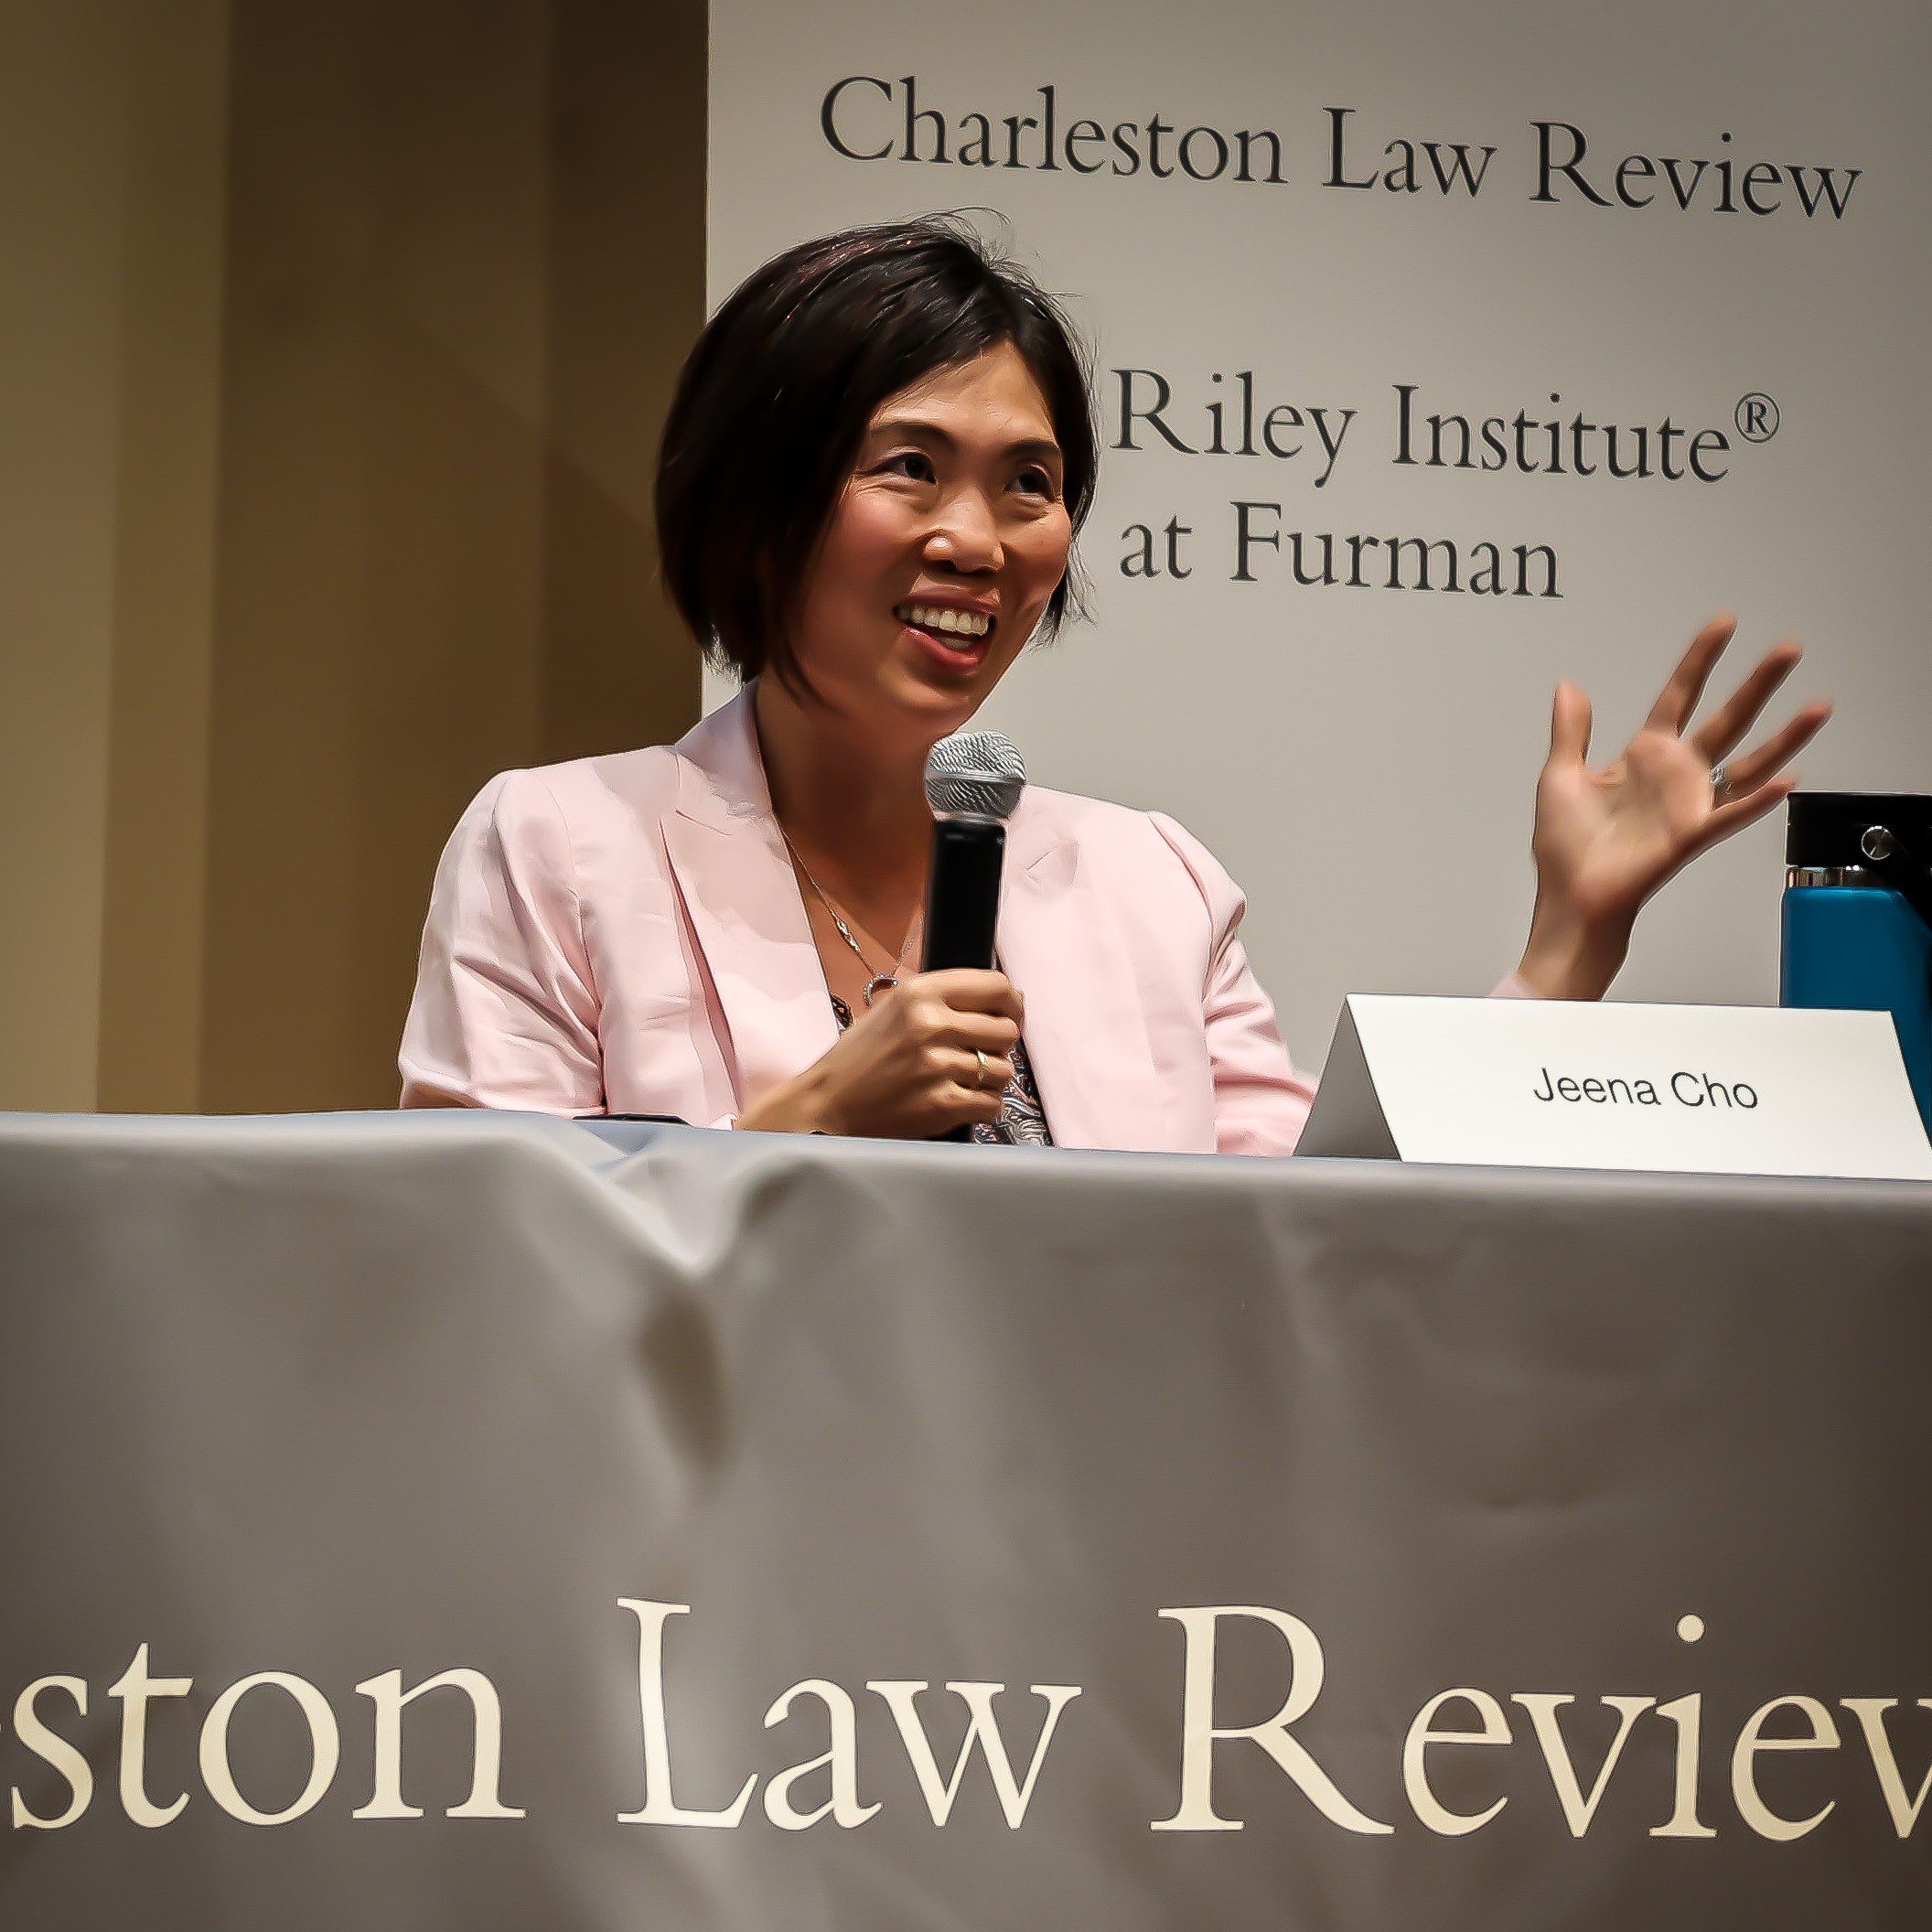 Jeena Cho, attorney and author of 